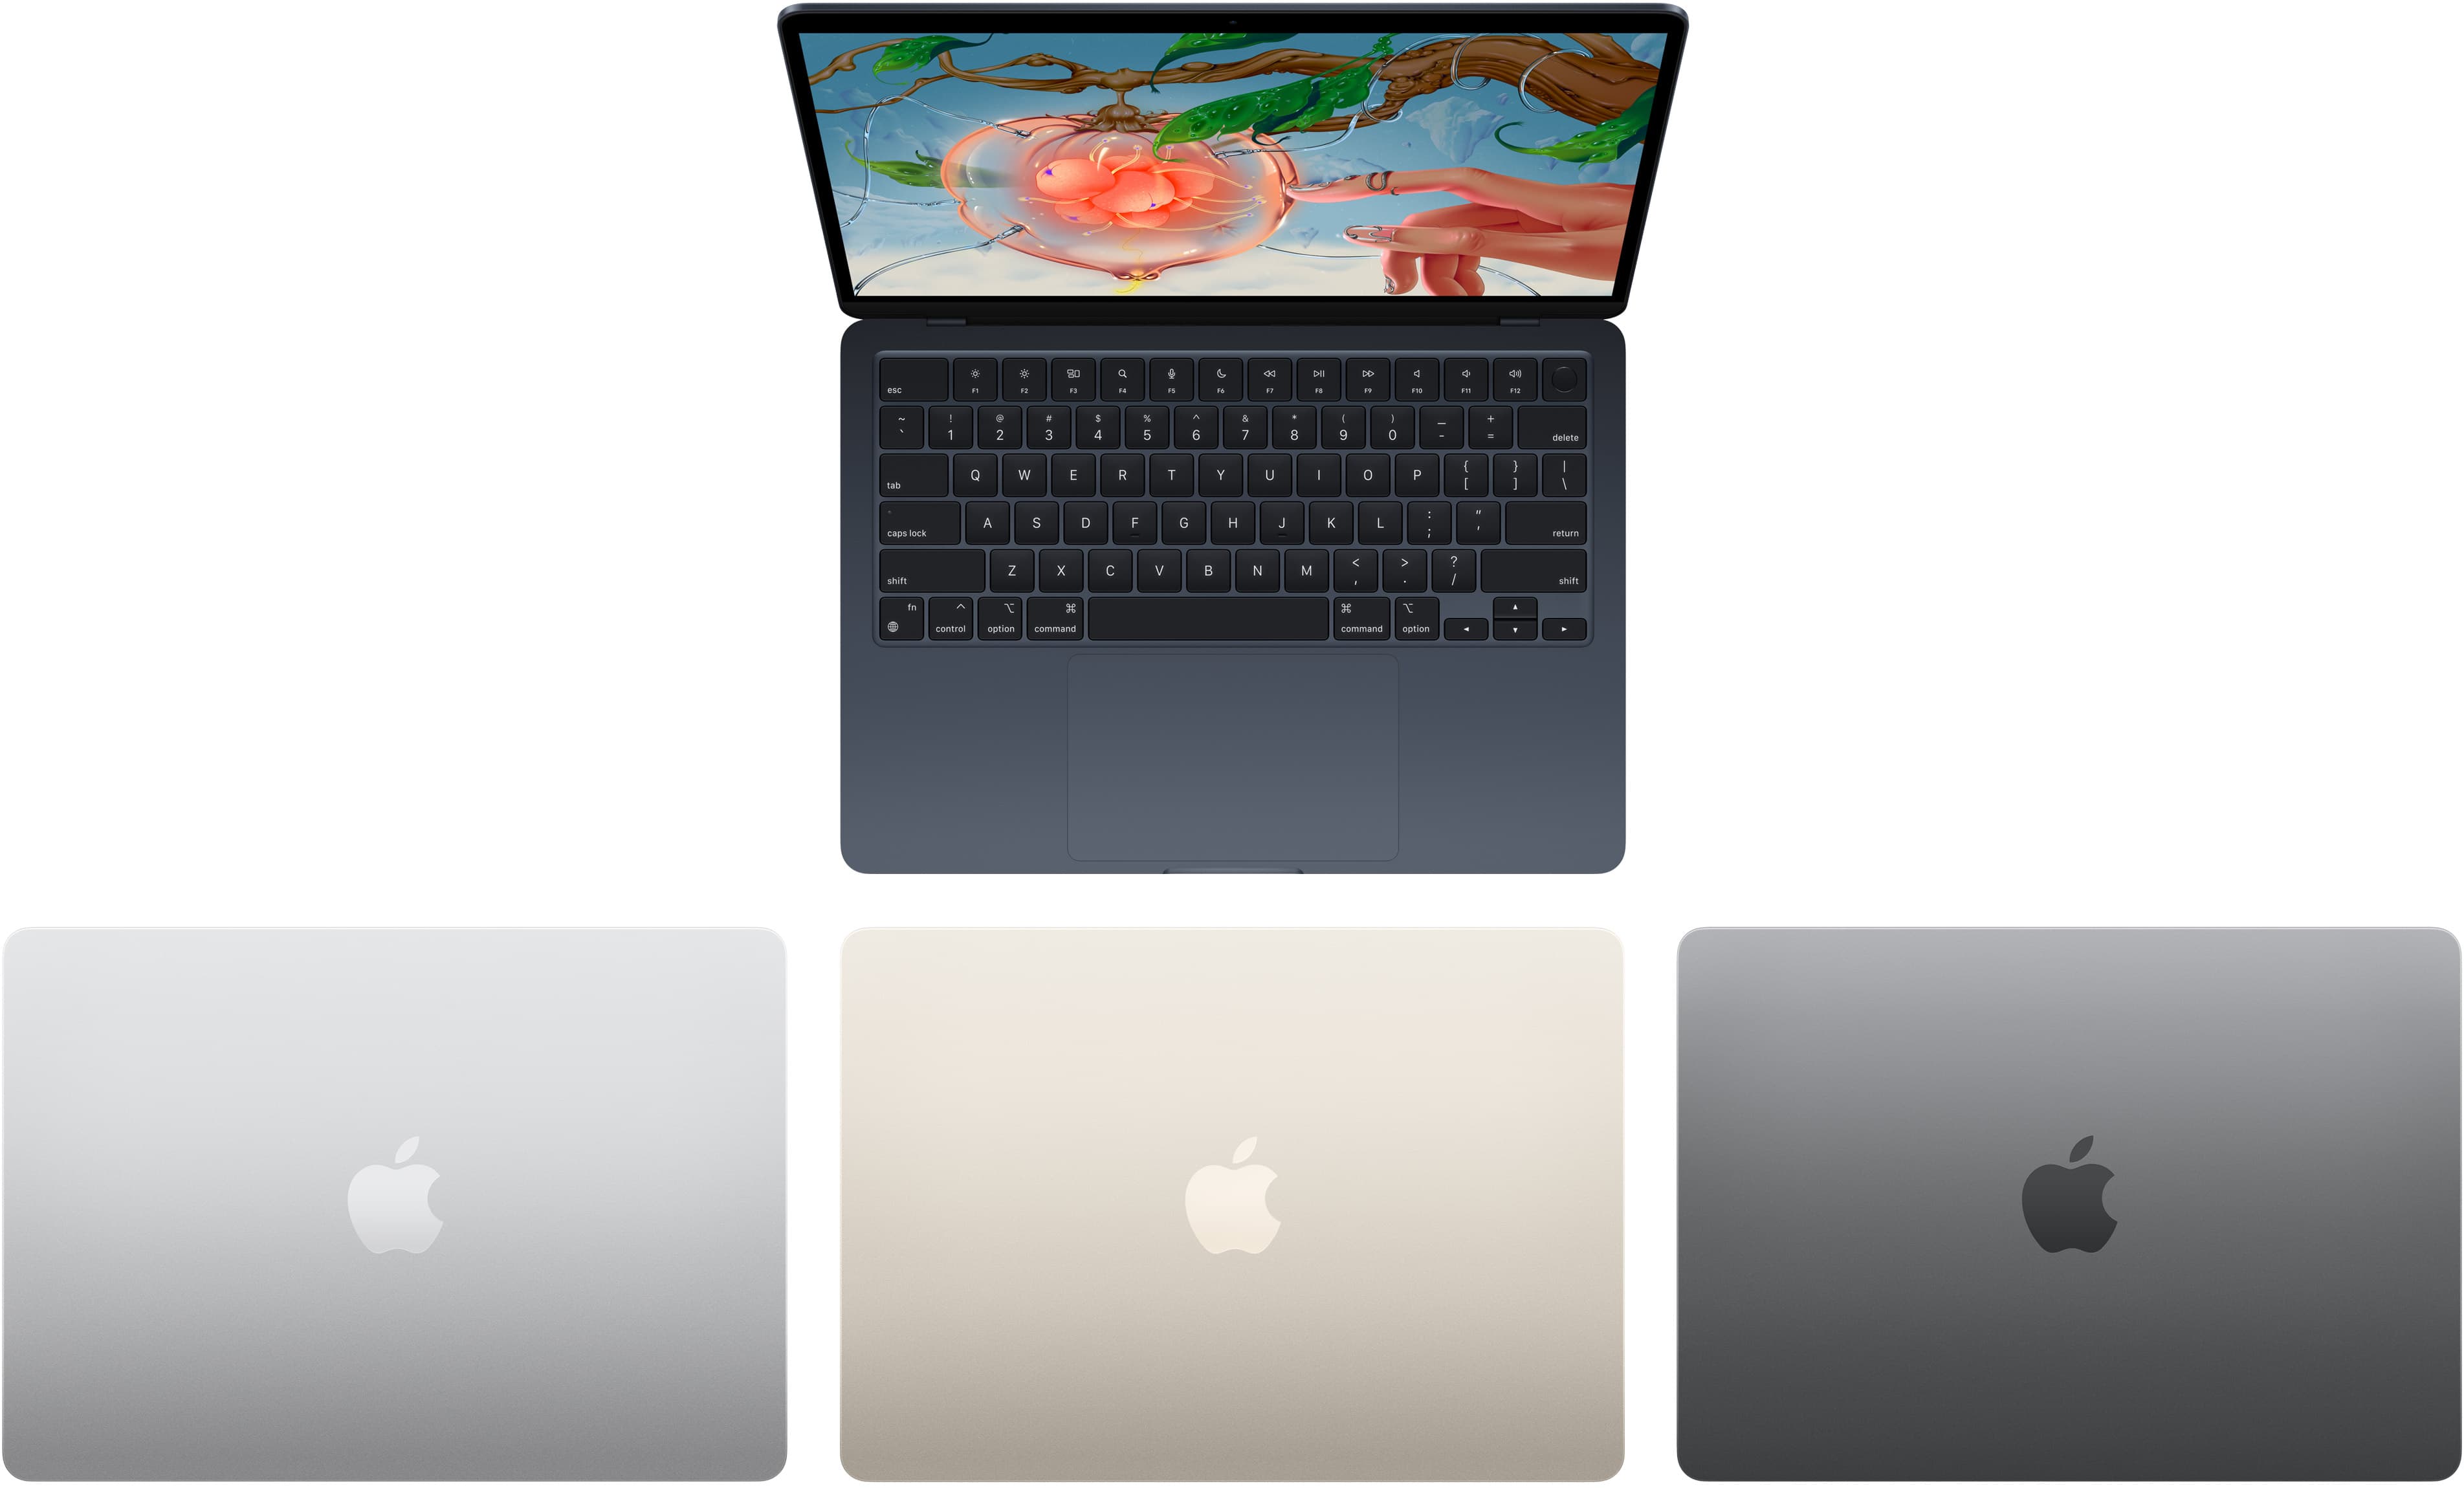 The new MacBook Air colors